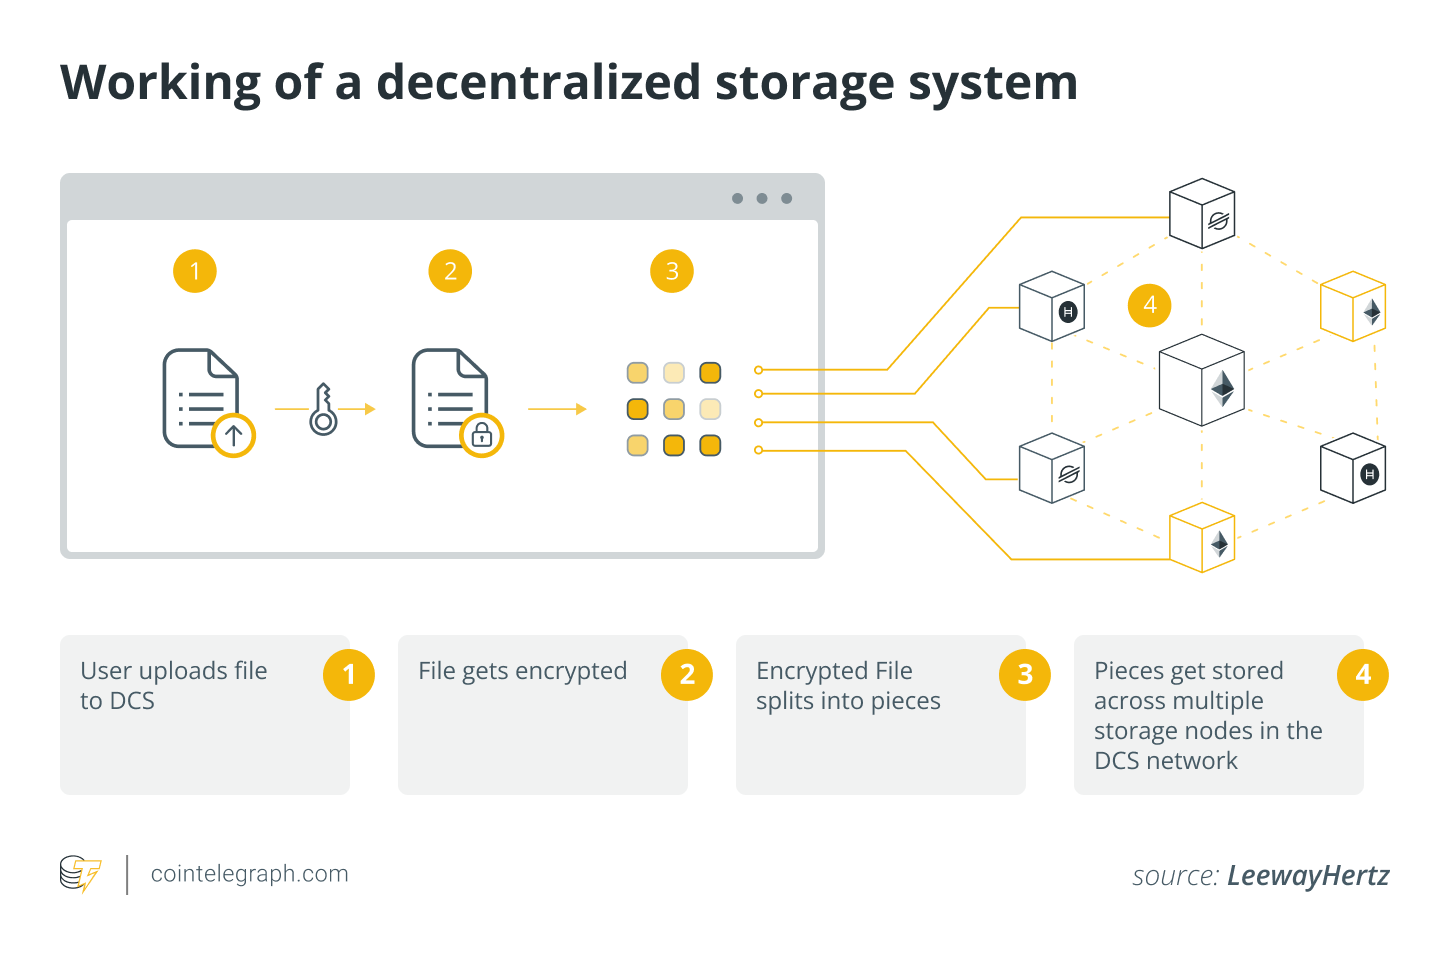 Working of a decentralized storage system